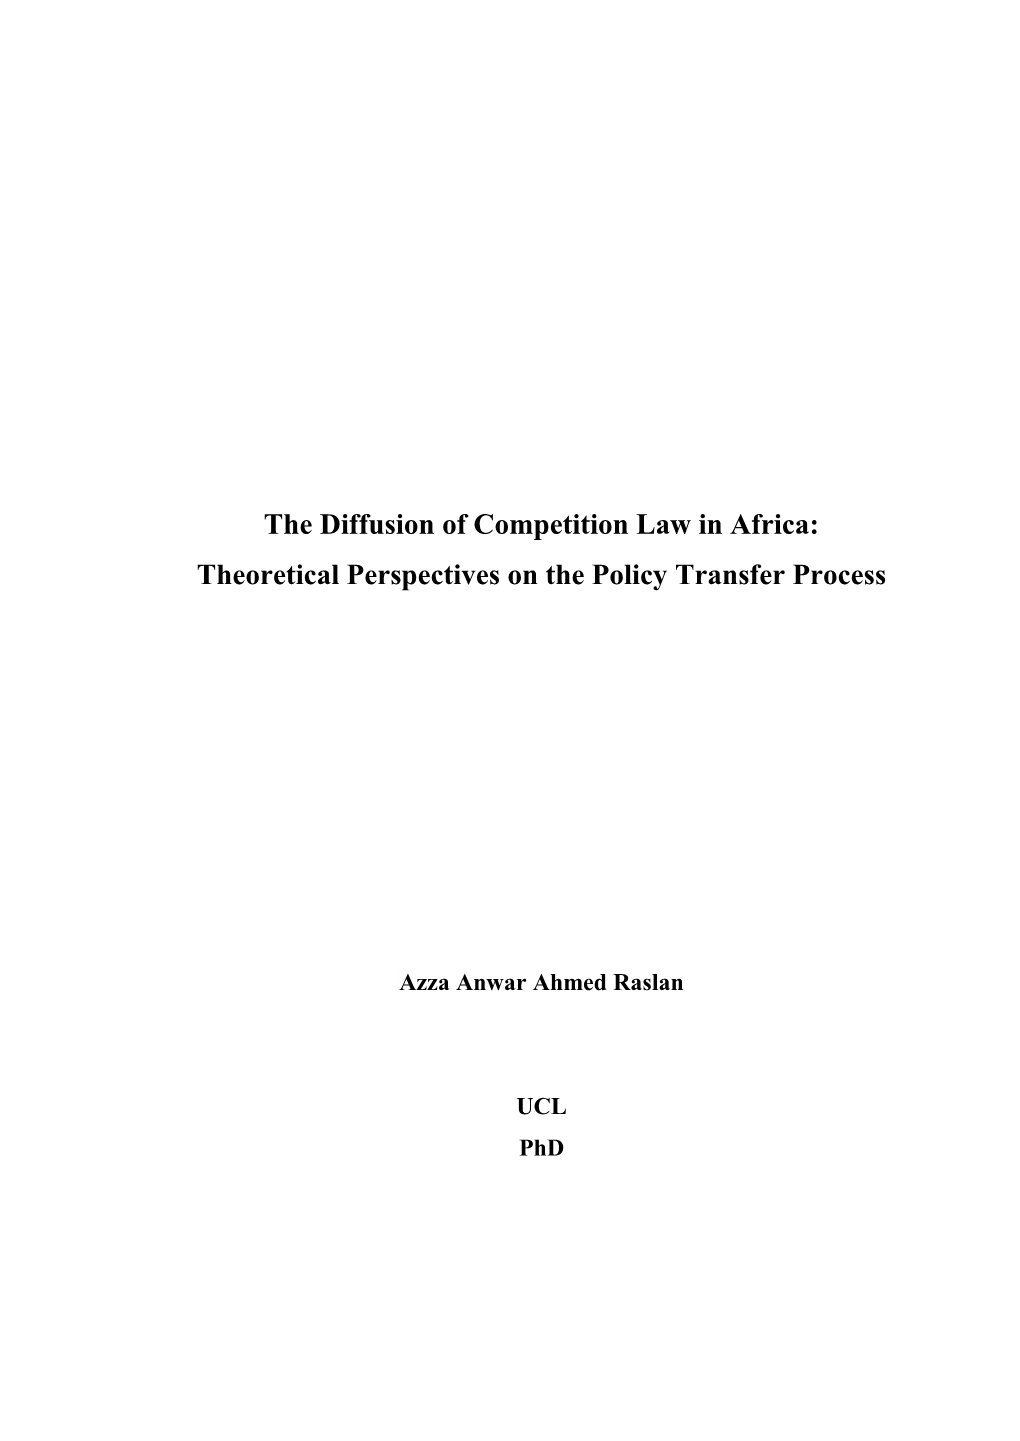 The Diffusion of Competition Law in Africa: Theoretical Perspectives on the Policy Transfer Process